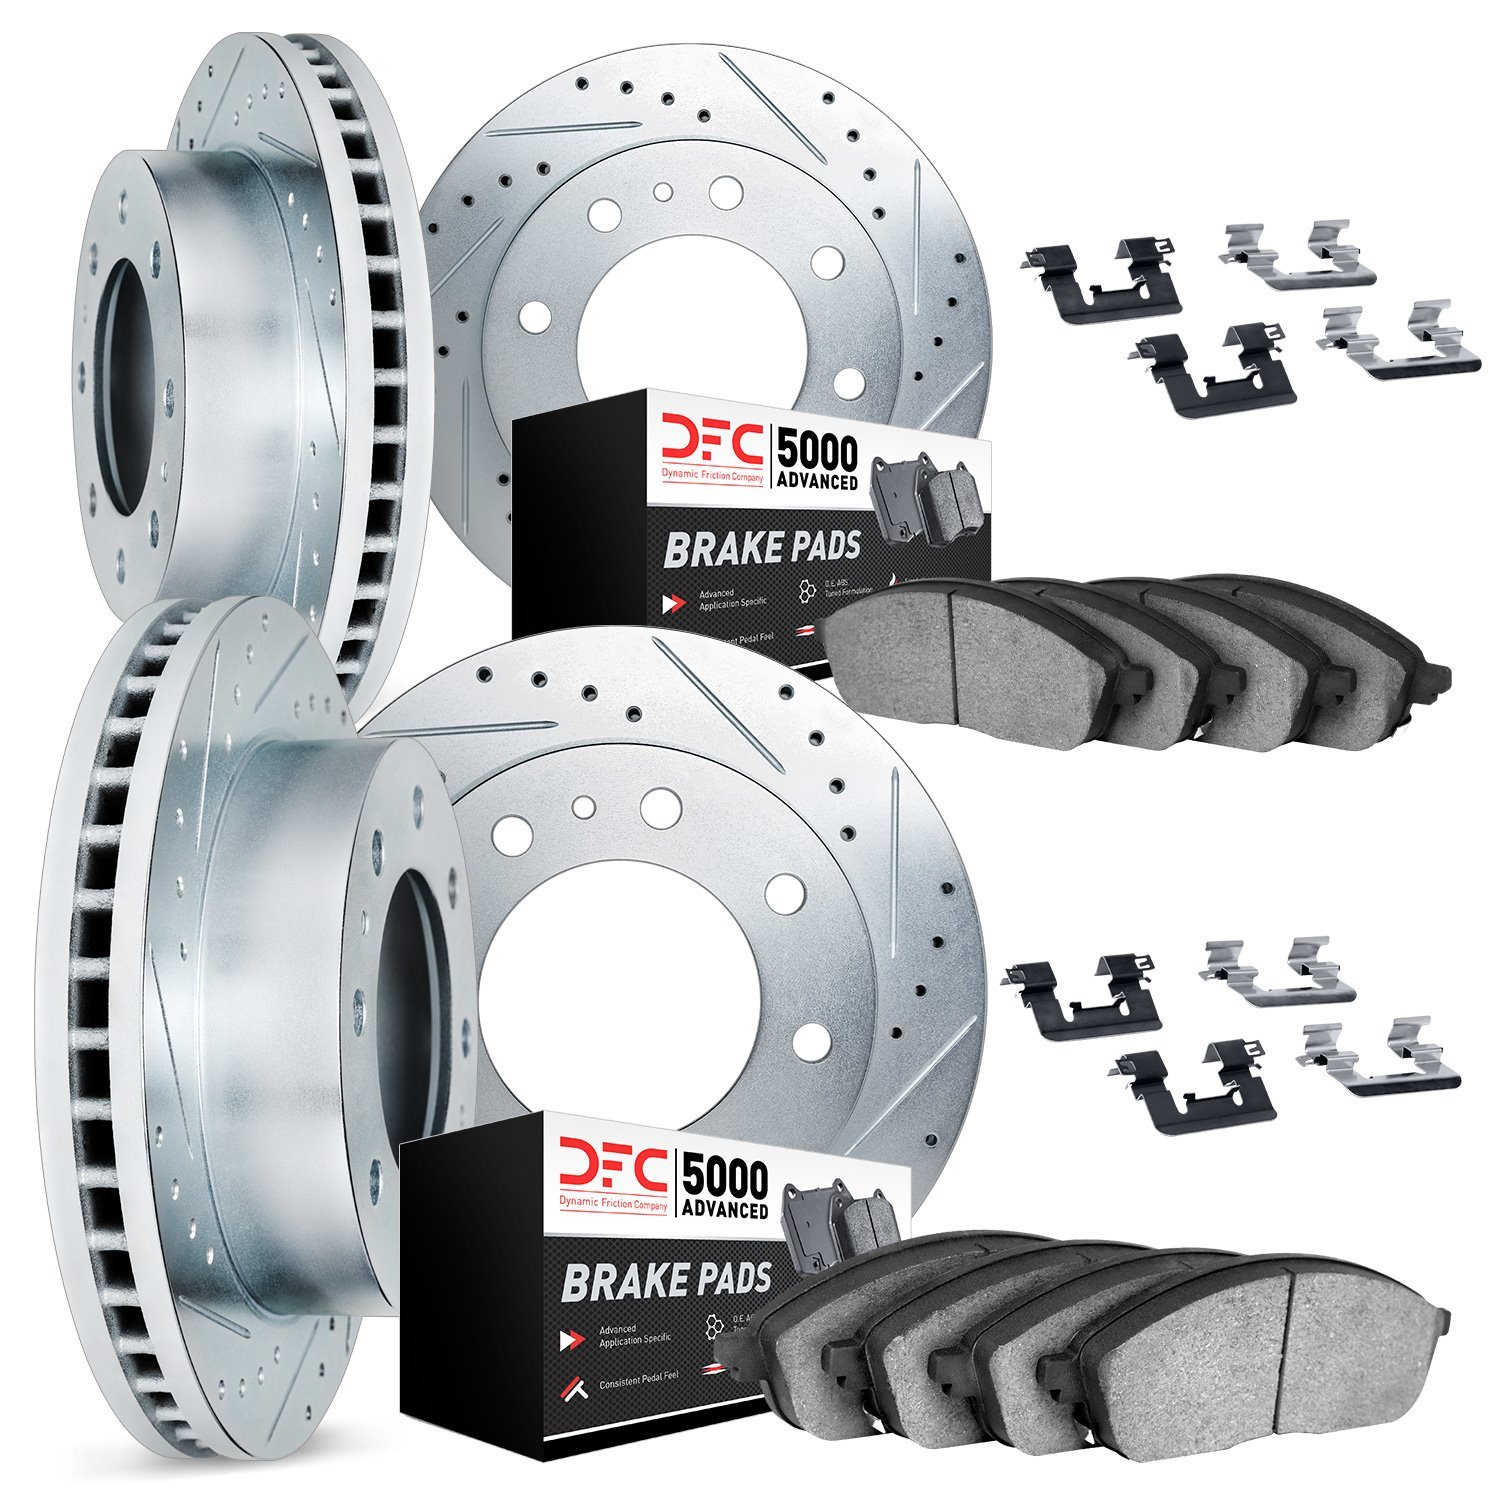 7514-54394 Drilled/Slotted Brake Rotors w/5000 Advanced Brake Pads Kit & Hardware [Silver], Fits Select Ford/Lincoln/Mercury/Maz